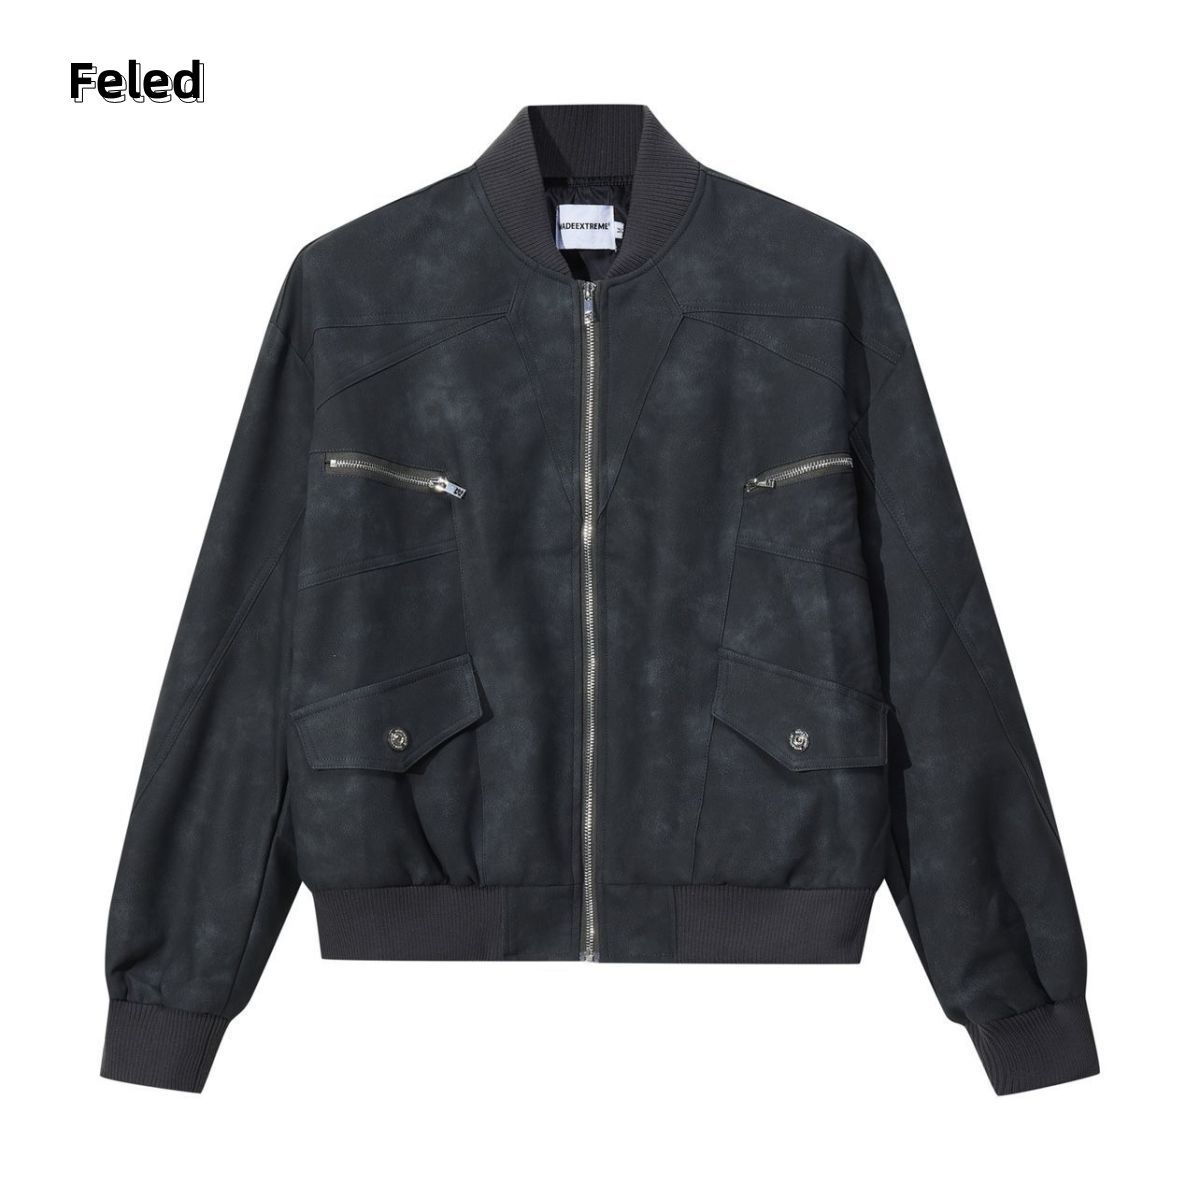 Feila Denton autumn and winter high-end American retro street thickened quilted zipper pocket jacket men's and women's trendy jacket